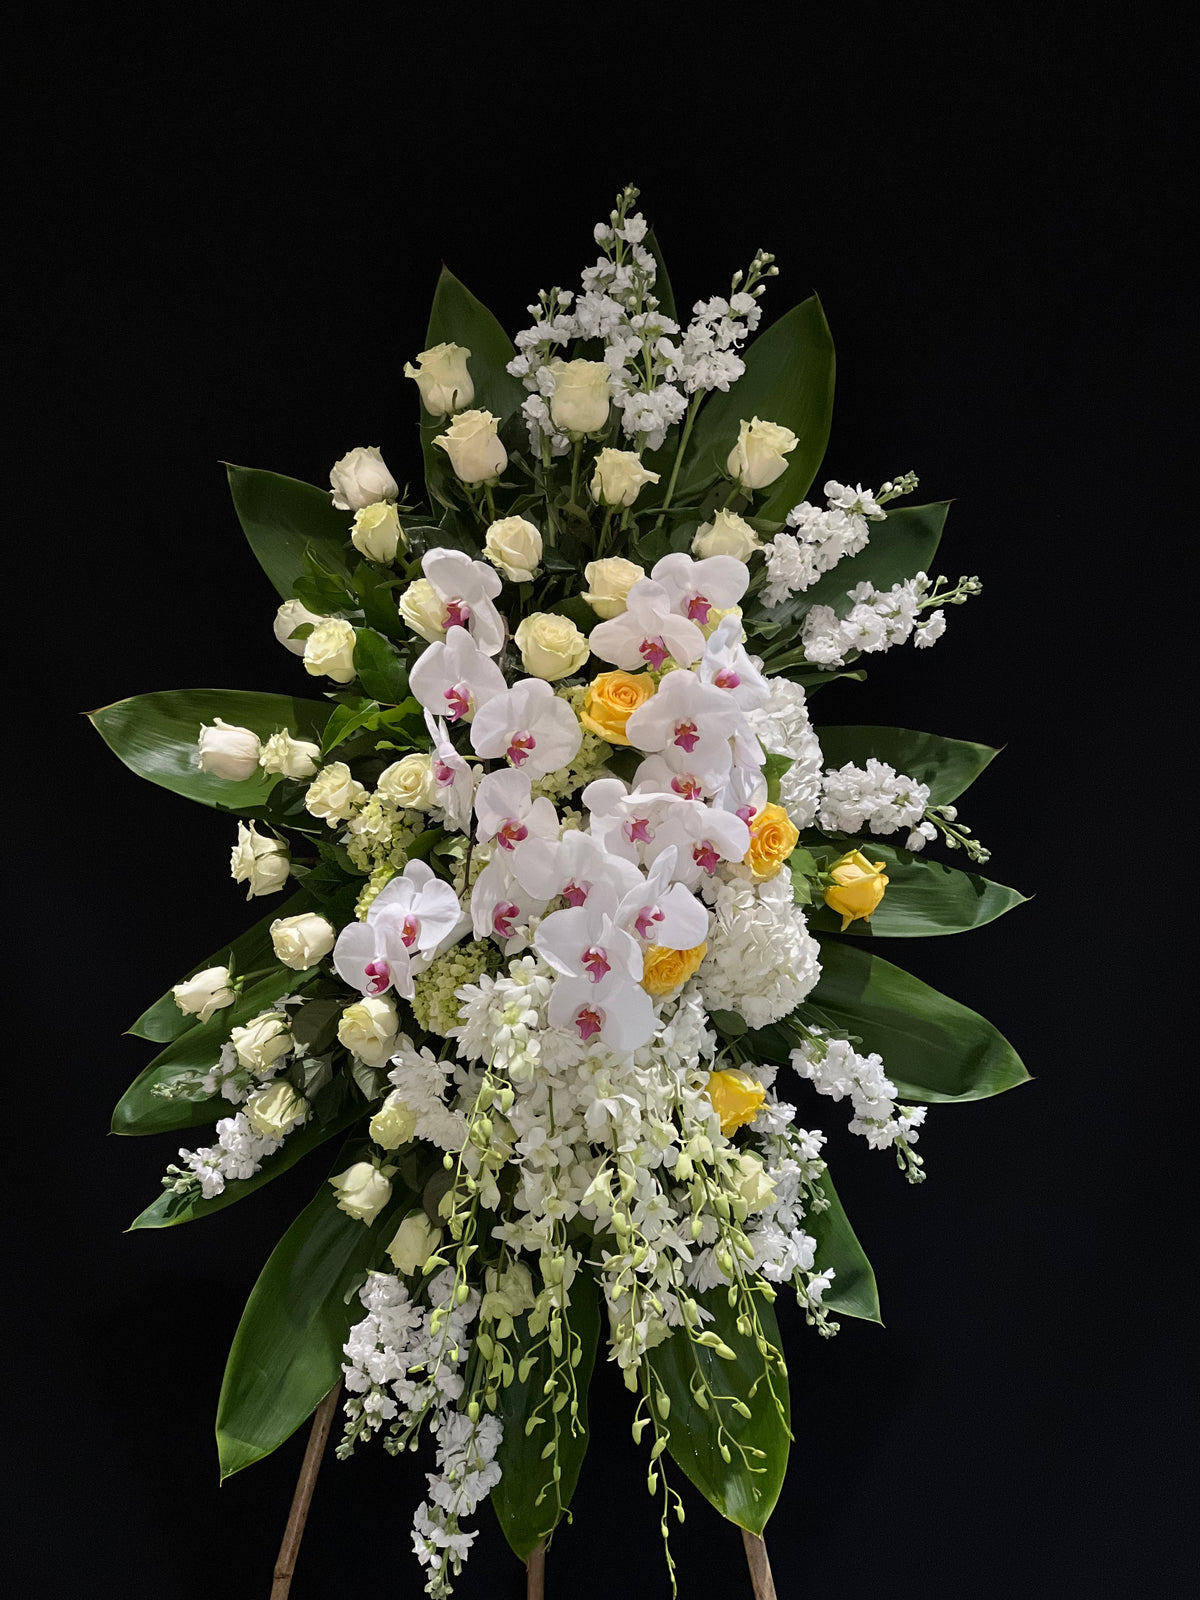 White and Yellow Funeral Standing Spray with Stocks, Roses, Hydrangeas, Dendrobium Orchids, and Phalaenopsis Orchids